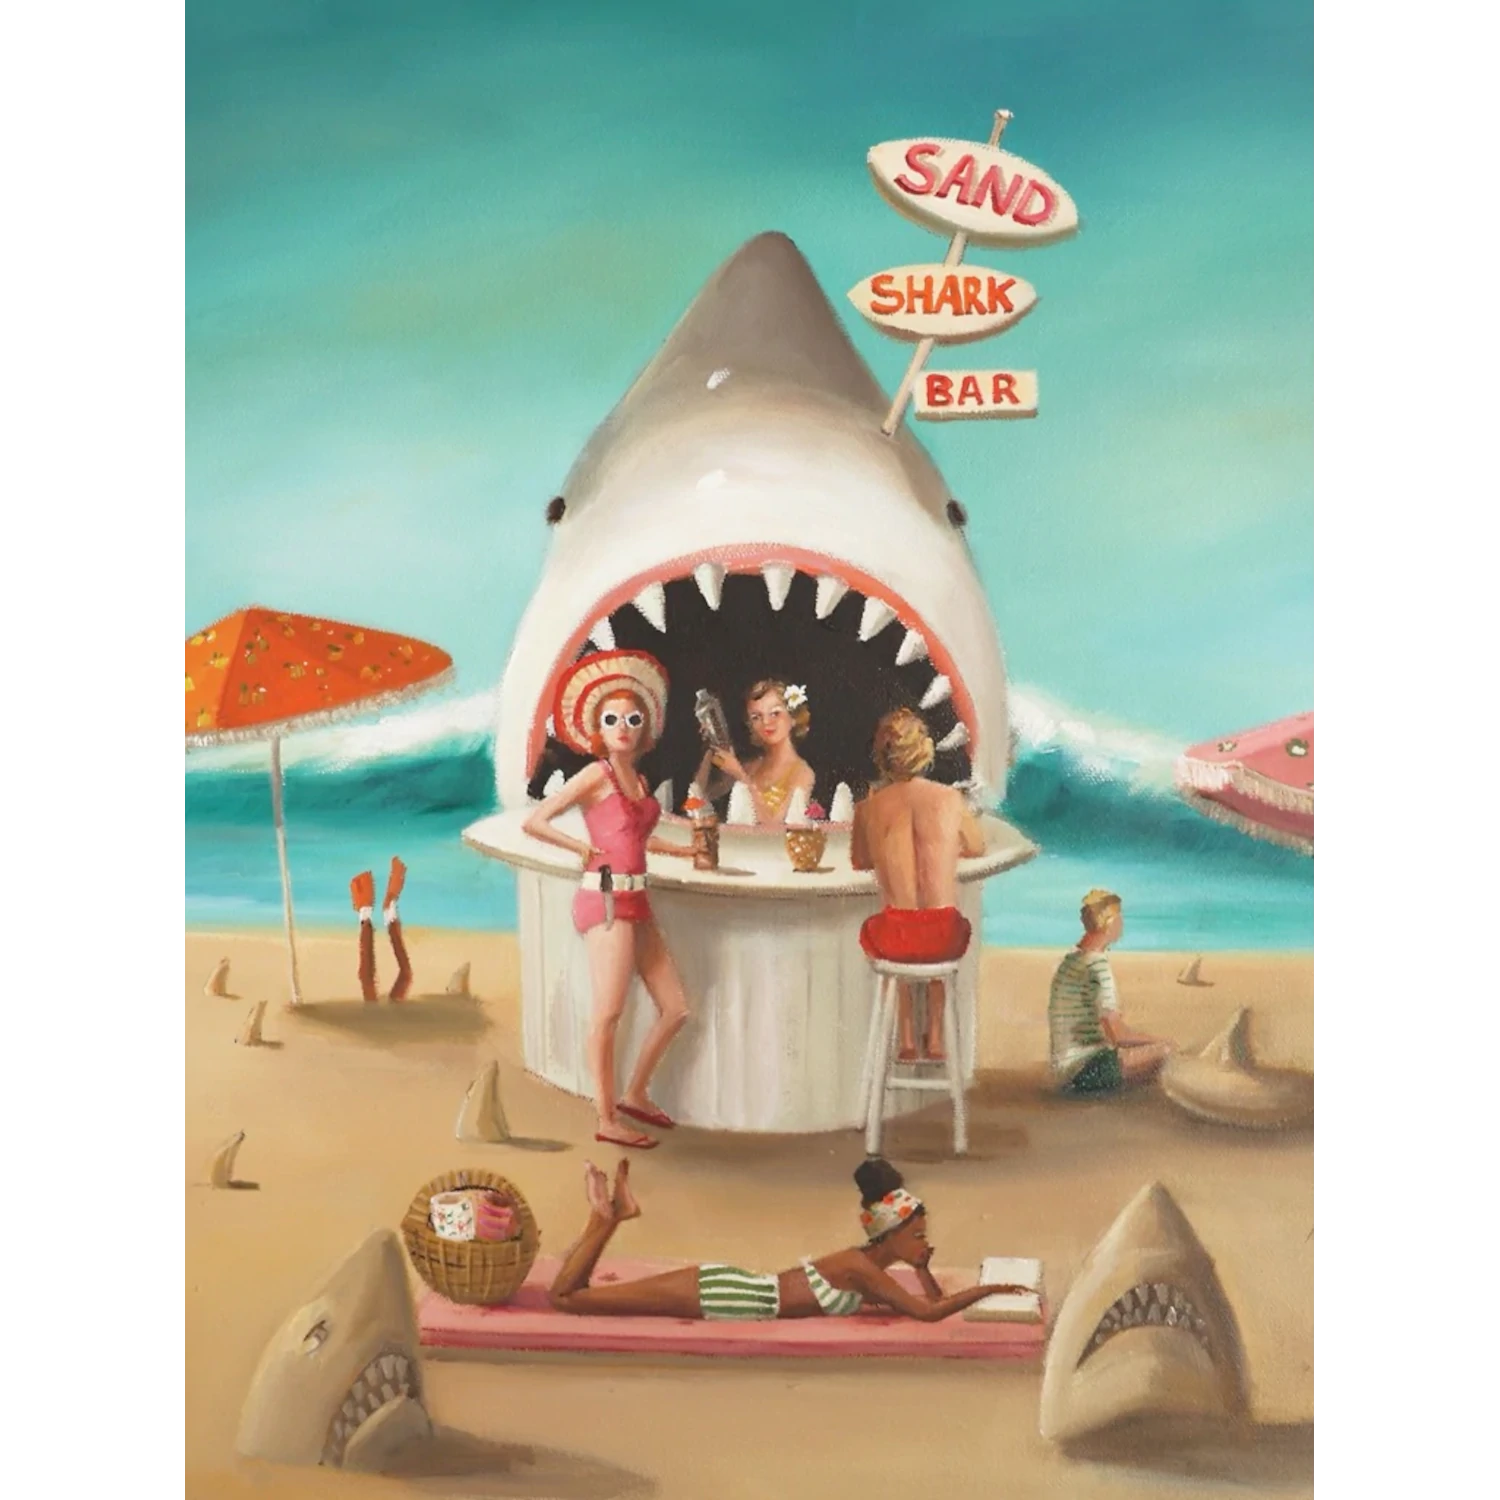 Beachgoers enjoying refreshments at a whimsical Sand Shark Bar depicted in a New York Puzzle Company jigsaw puzzle.